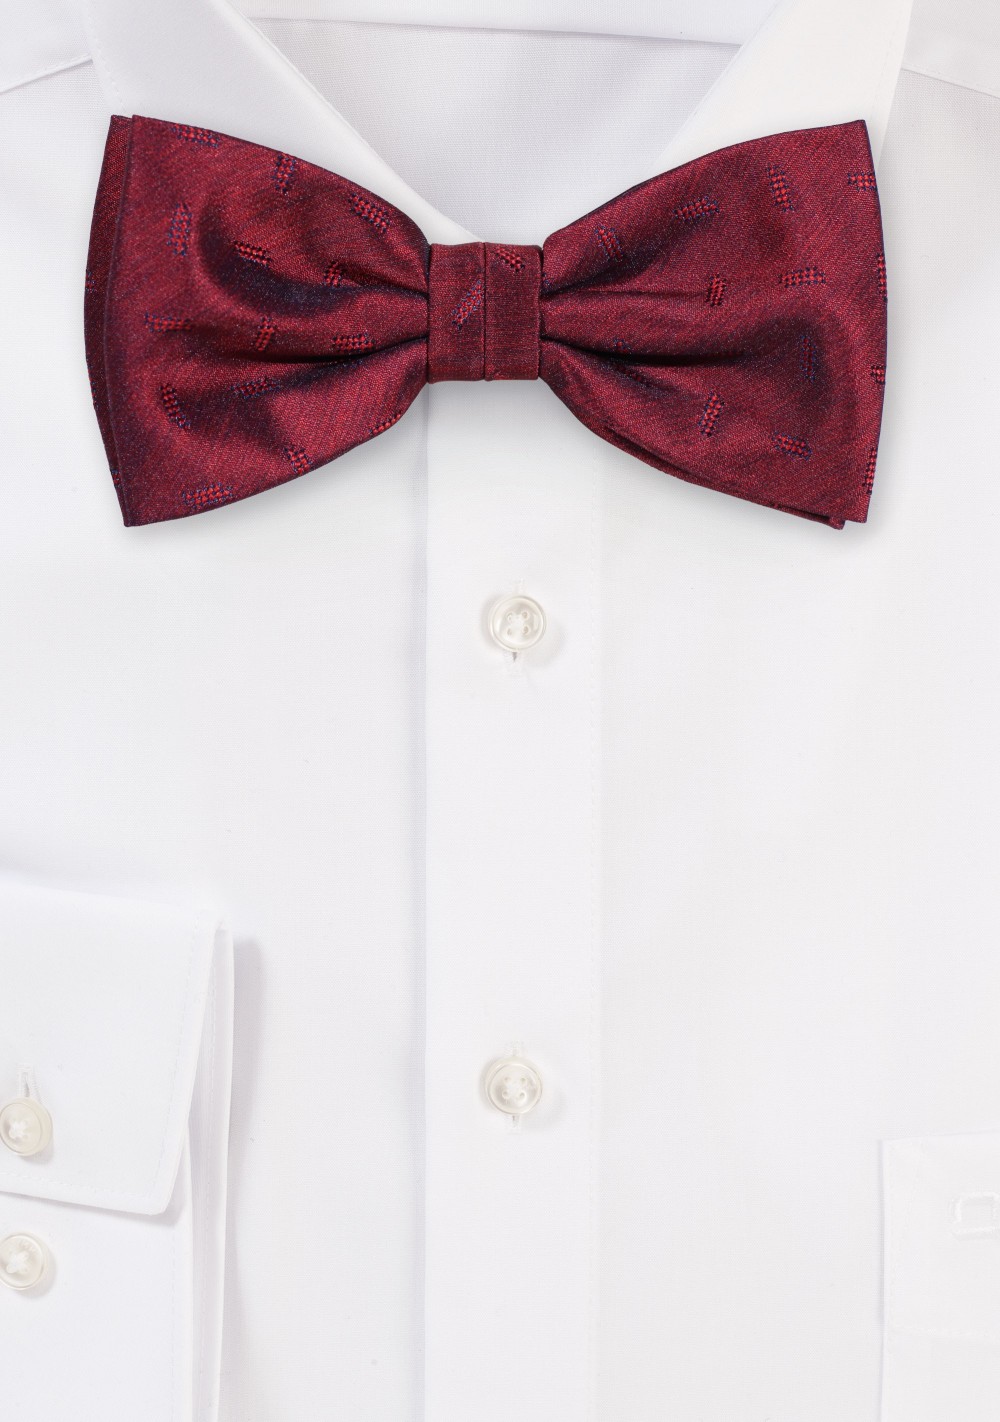 Mens Autumn Bow Tie in Deep Reds